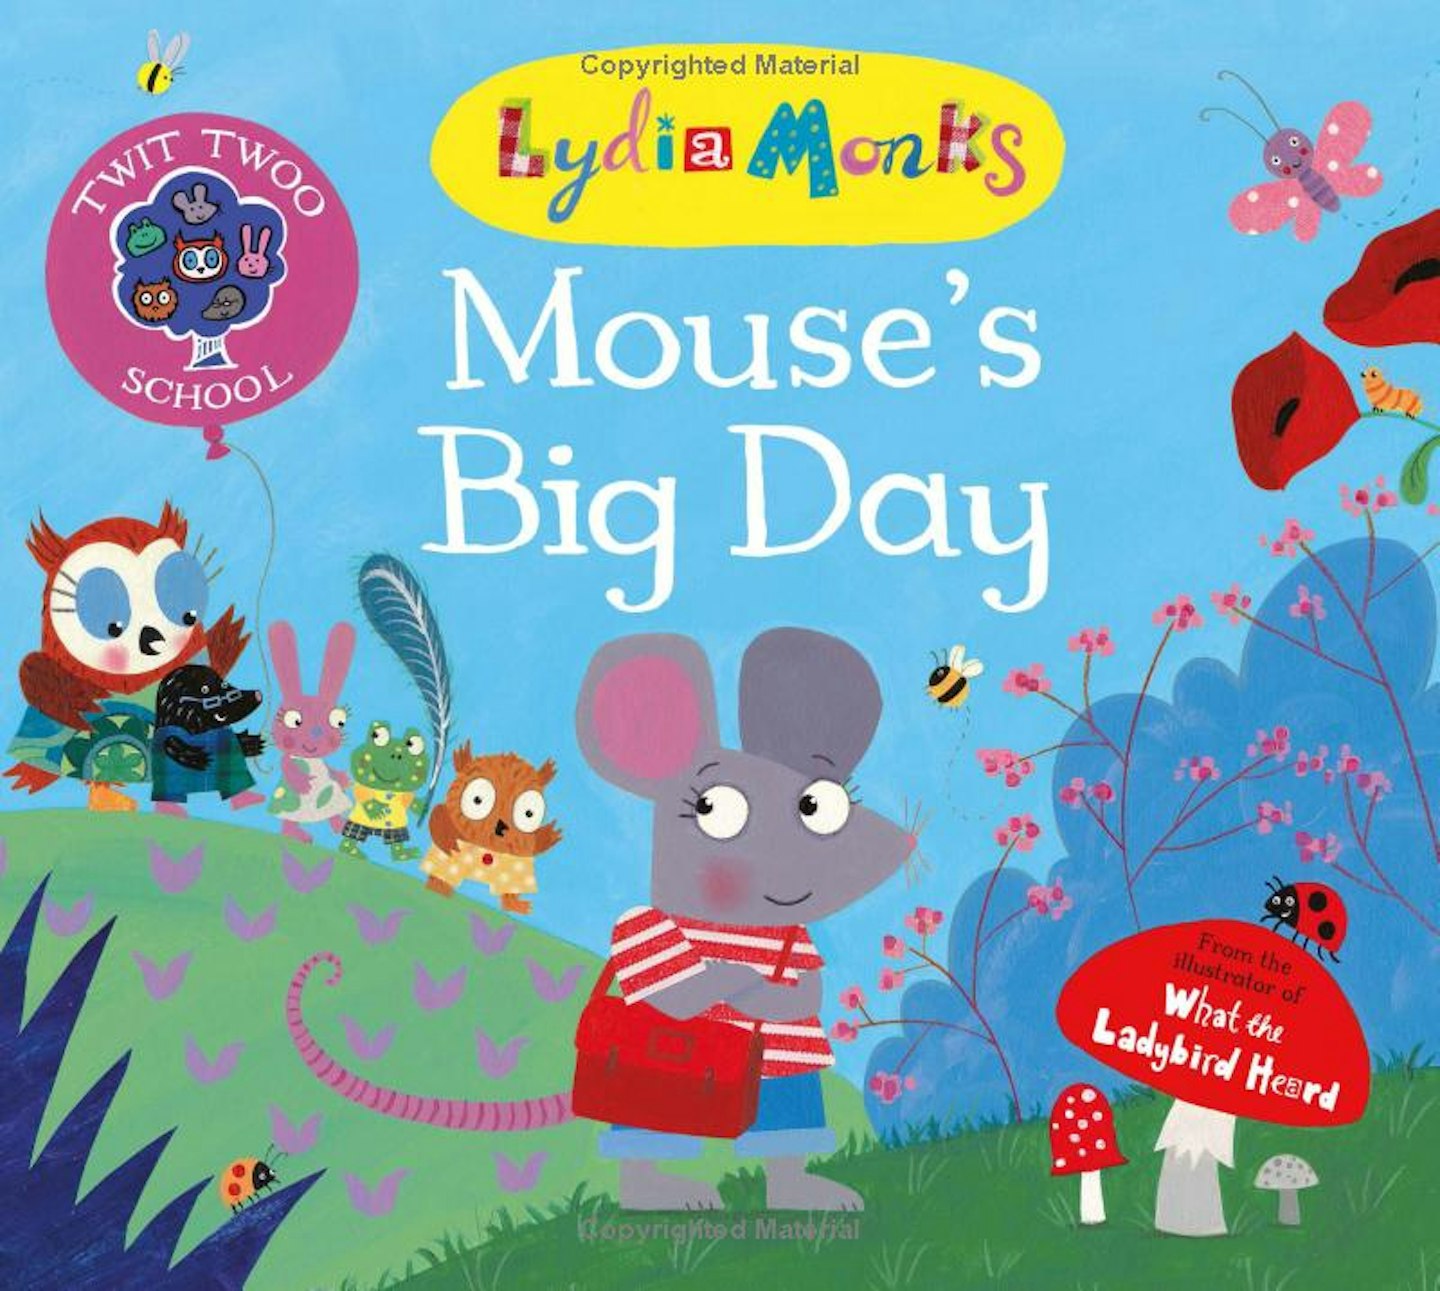 Mouse’s Big Day by Lydia Monk (3+, Fiction)